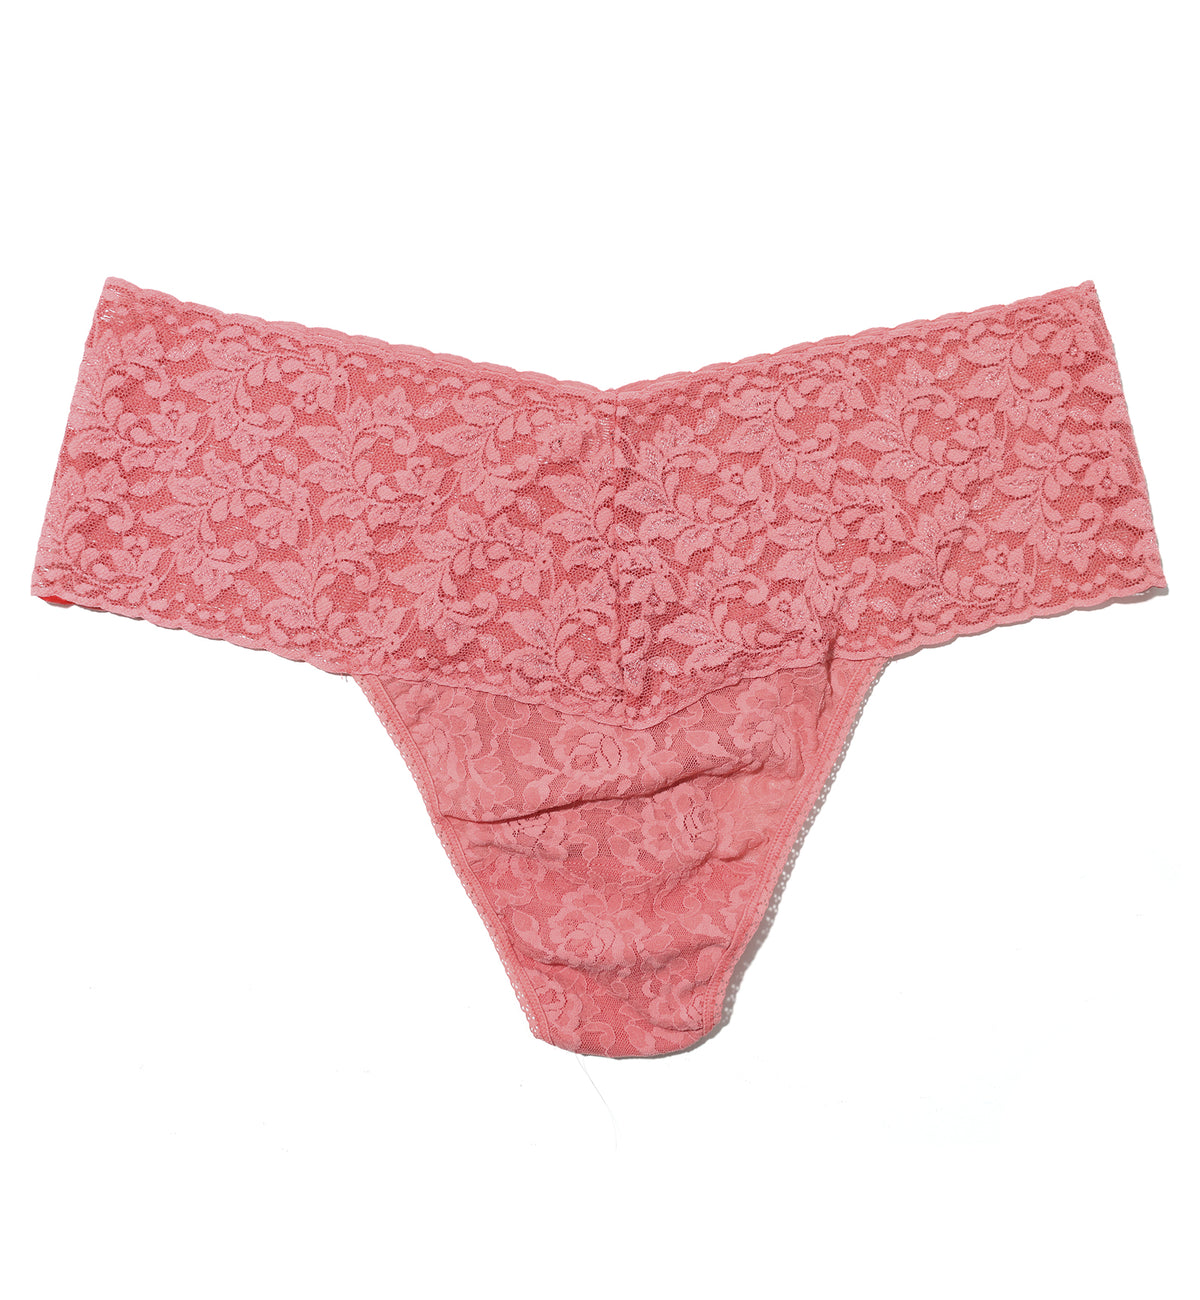 Hanky Panky High-Waist Retro Lace Thong (9K1926P),Guava Pink - Guava Pink,One Size